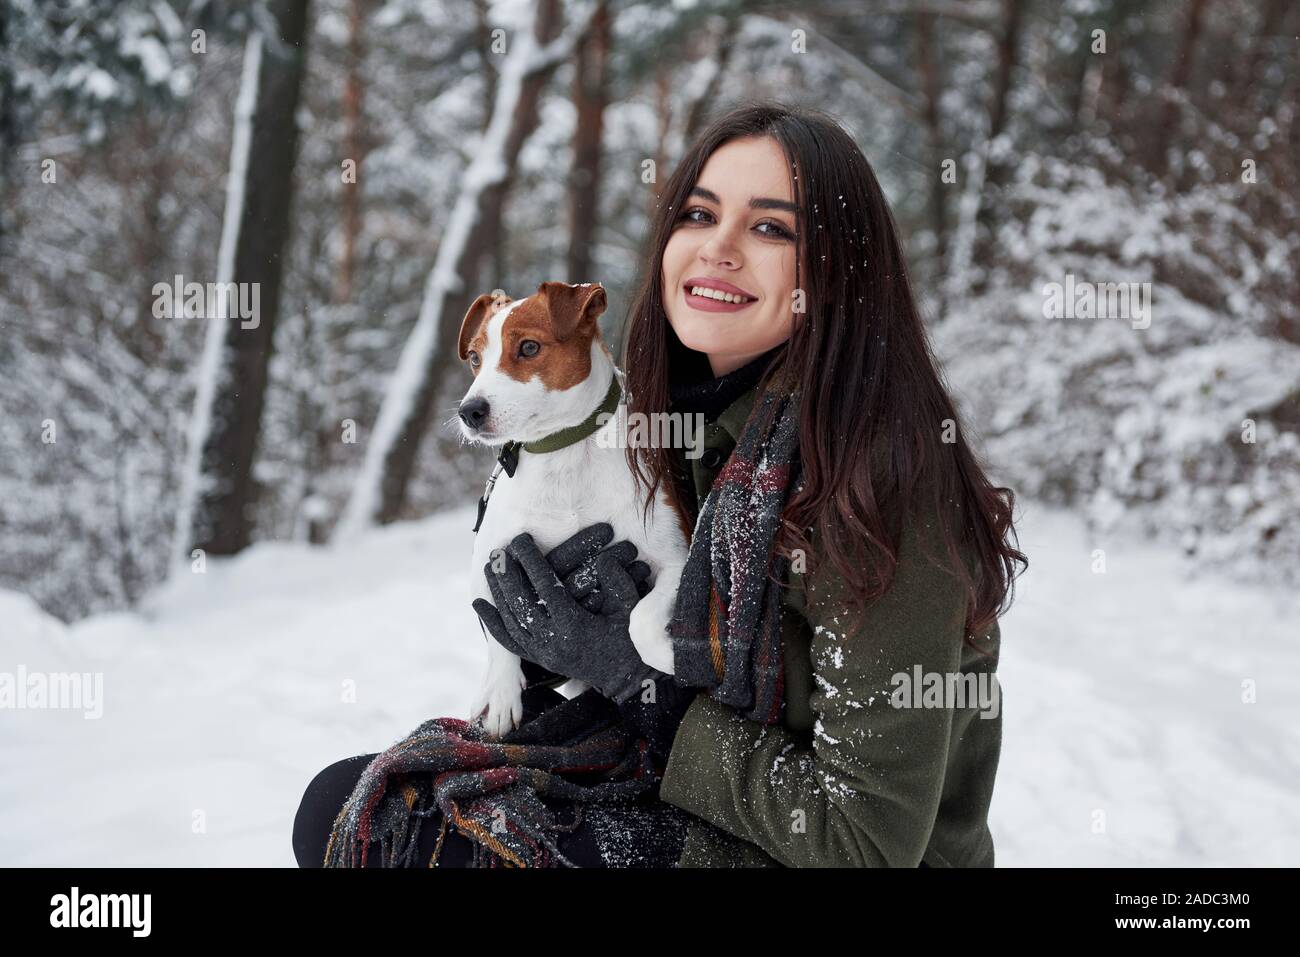 Pet is have more important things than posing for photoshoot. Smiling brunette having fun while walking with her dog in the winter park Stock Photo